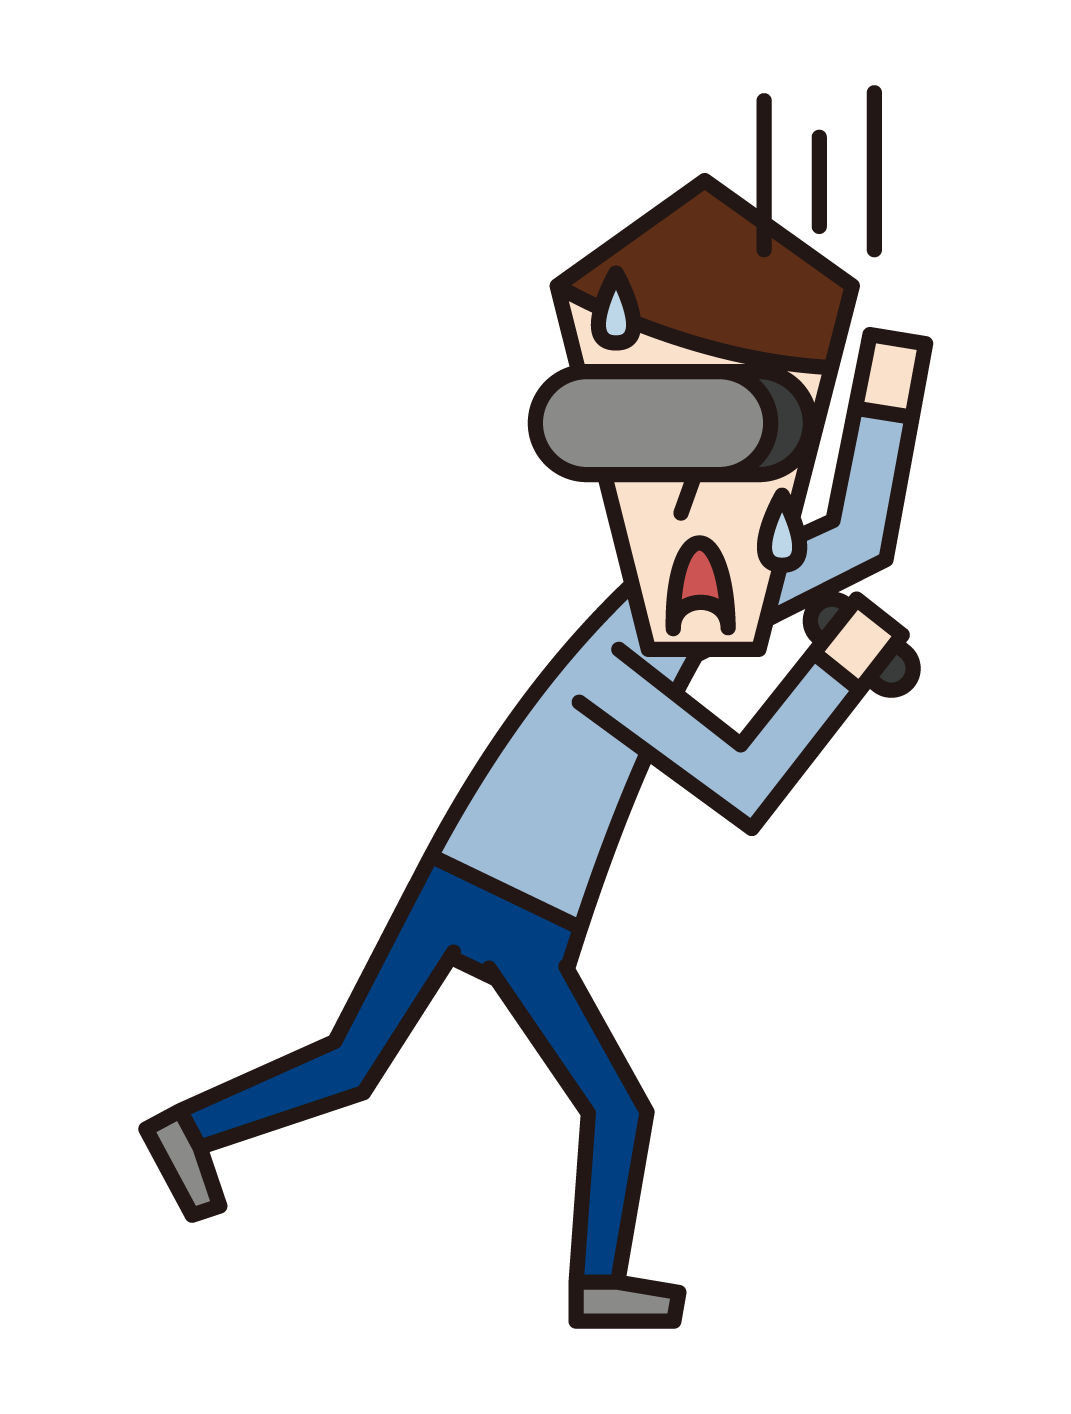 Illustration of a man who is surprised while vr